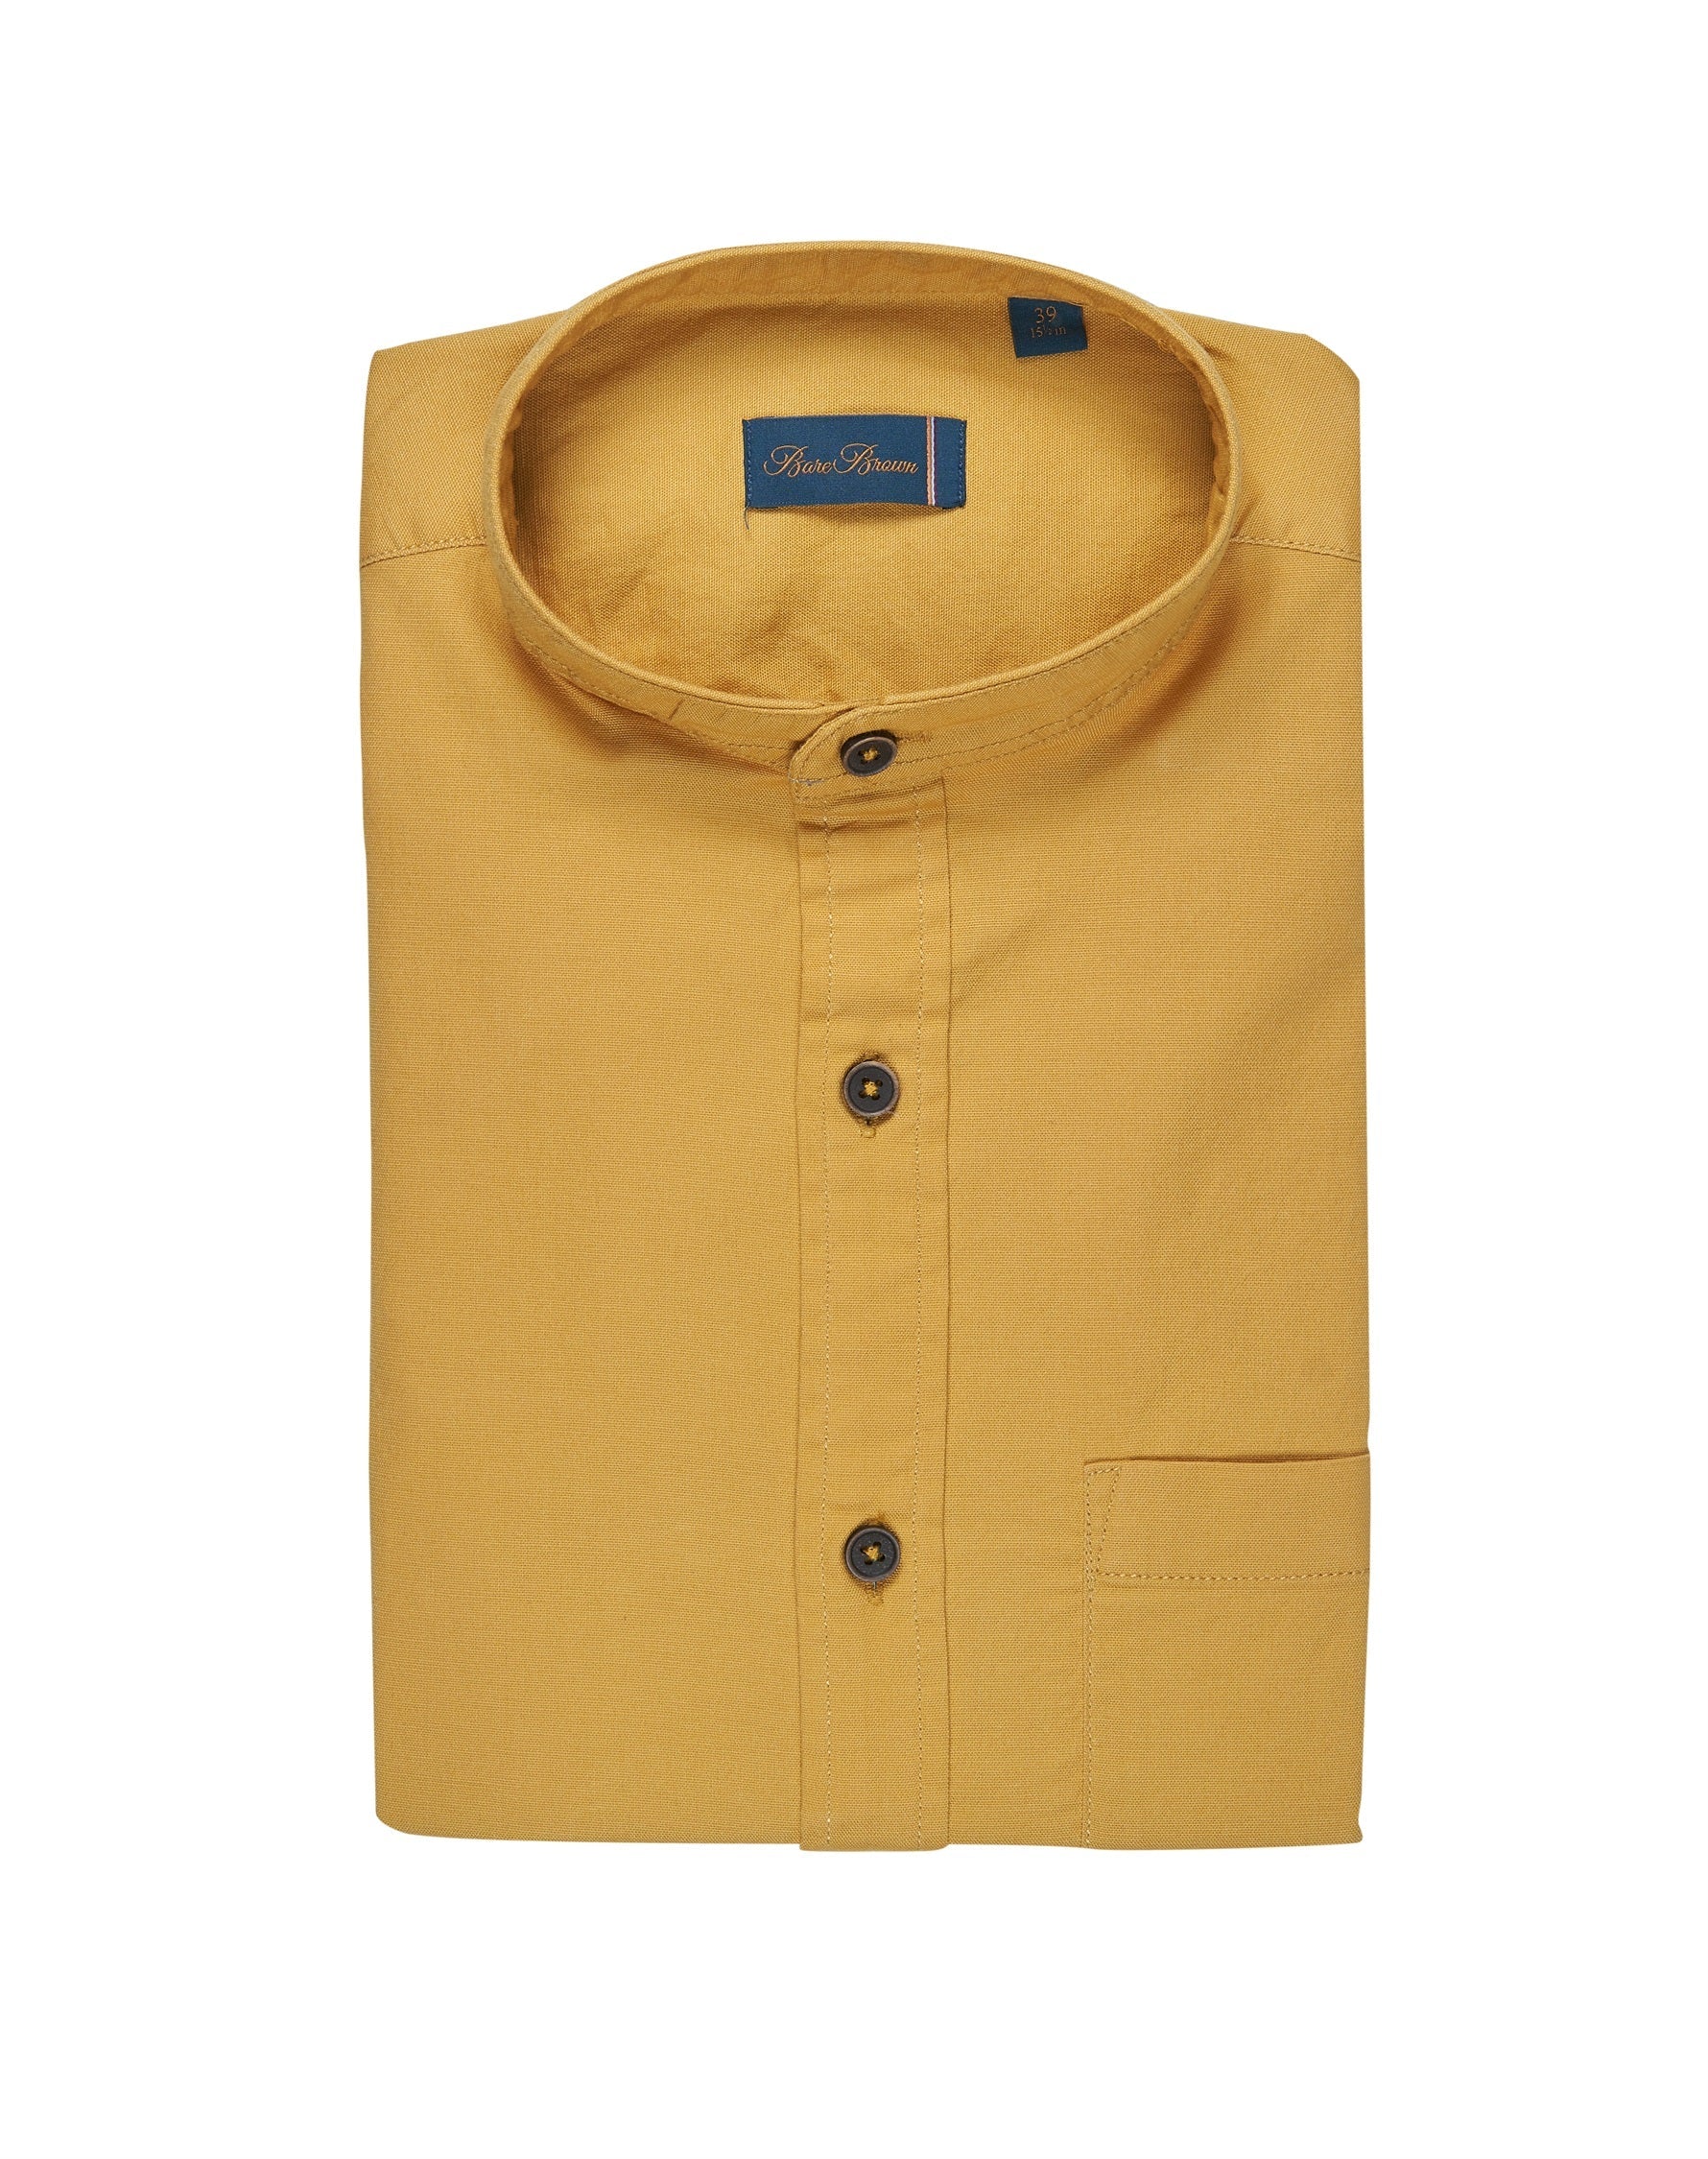 Bare Brown Mandarin Collar Stretch Cotton Shirt, Slim Fit with Full Sleeves - Mustard